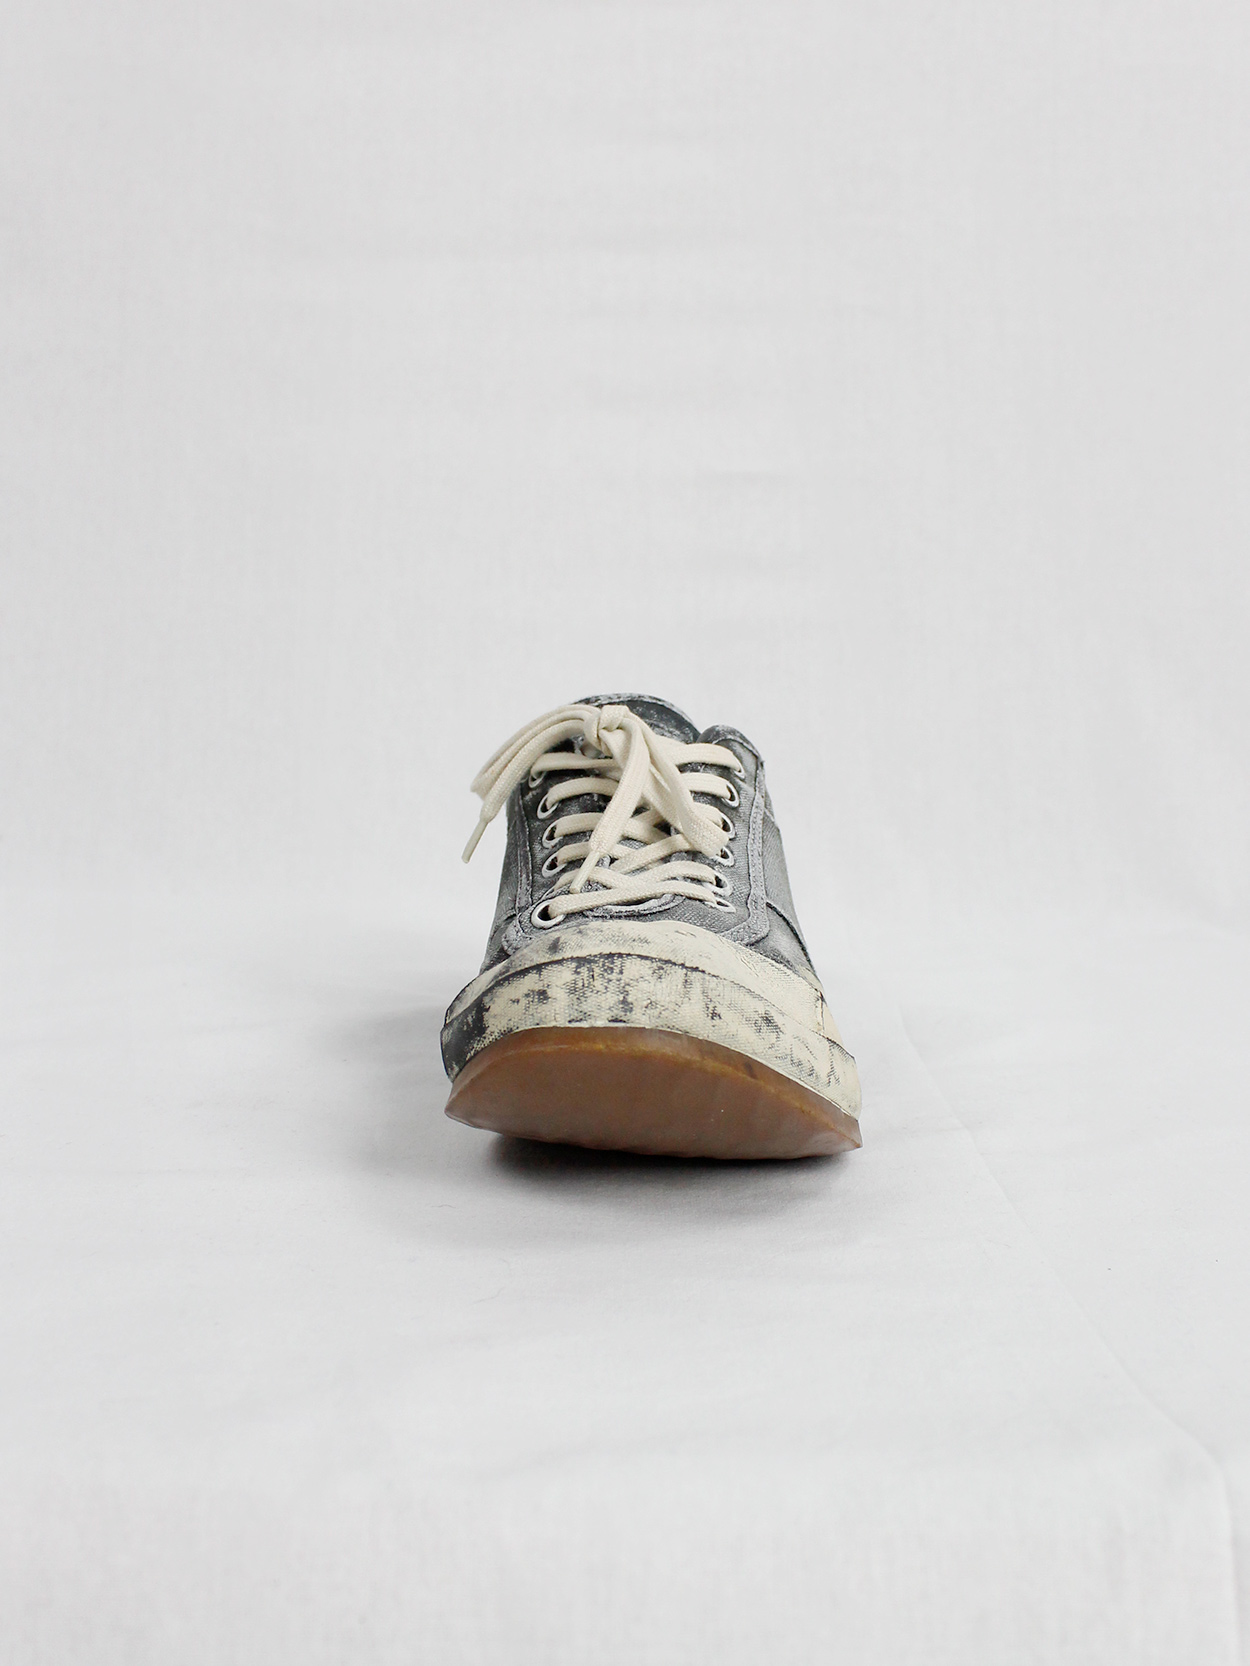 Maison Martin Margiela black and blue canvas sneakers painted in white fall 2006 (4)